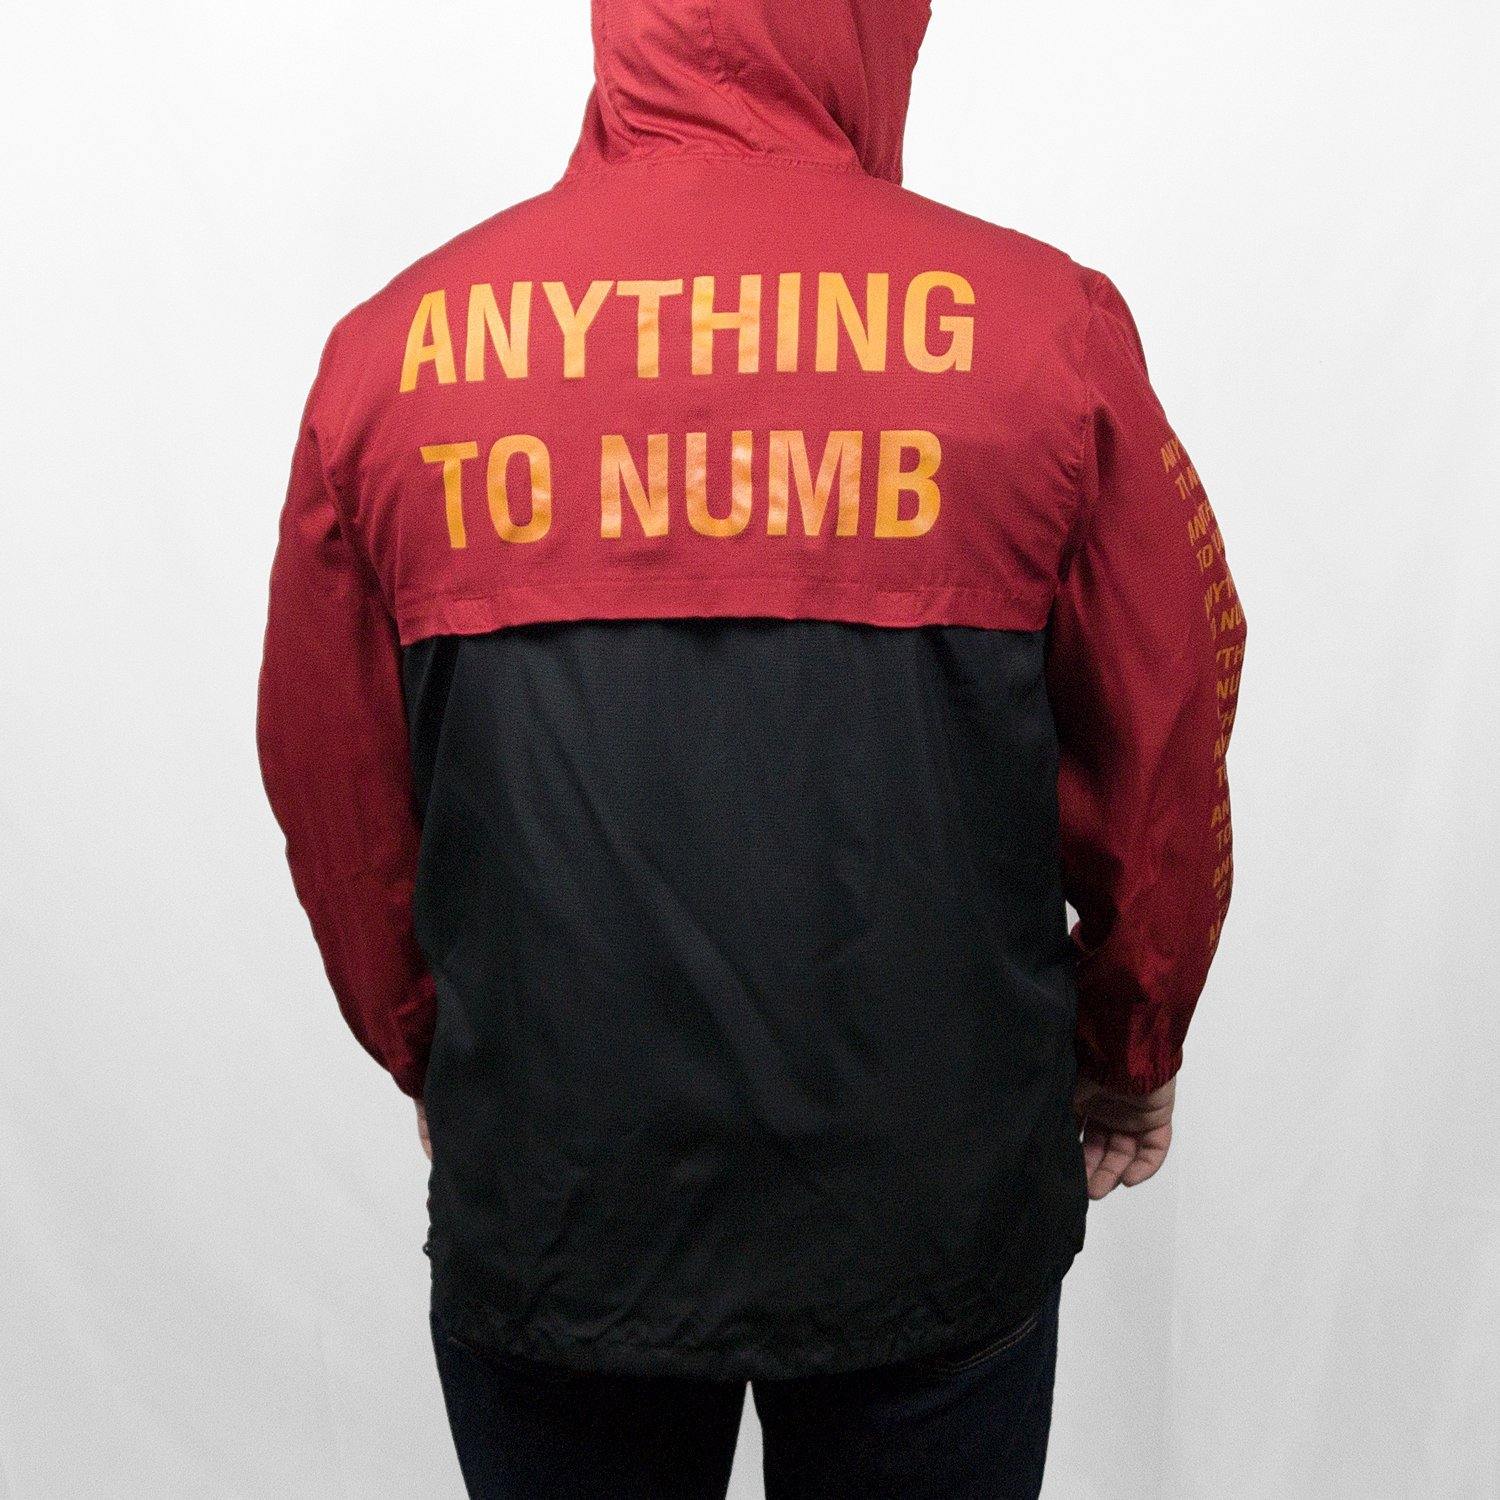 Buy – Varials "Anything To Numb" Anorak Jacket – Band & Music Merch – Cold Cuts Merch